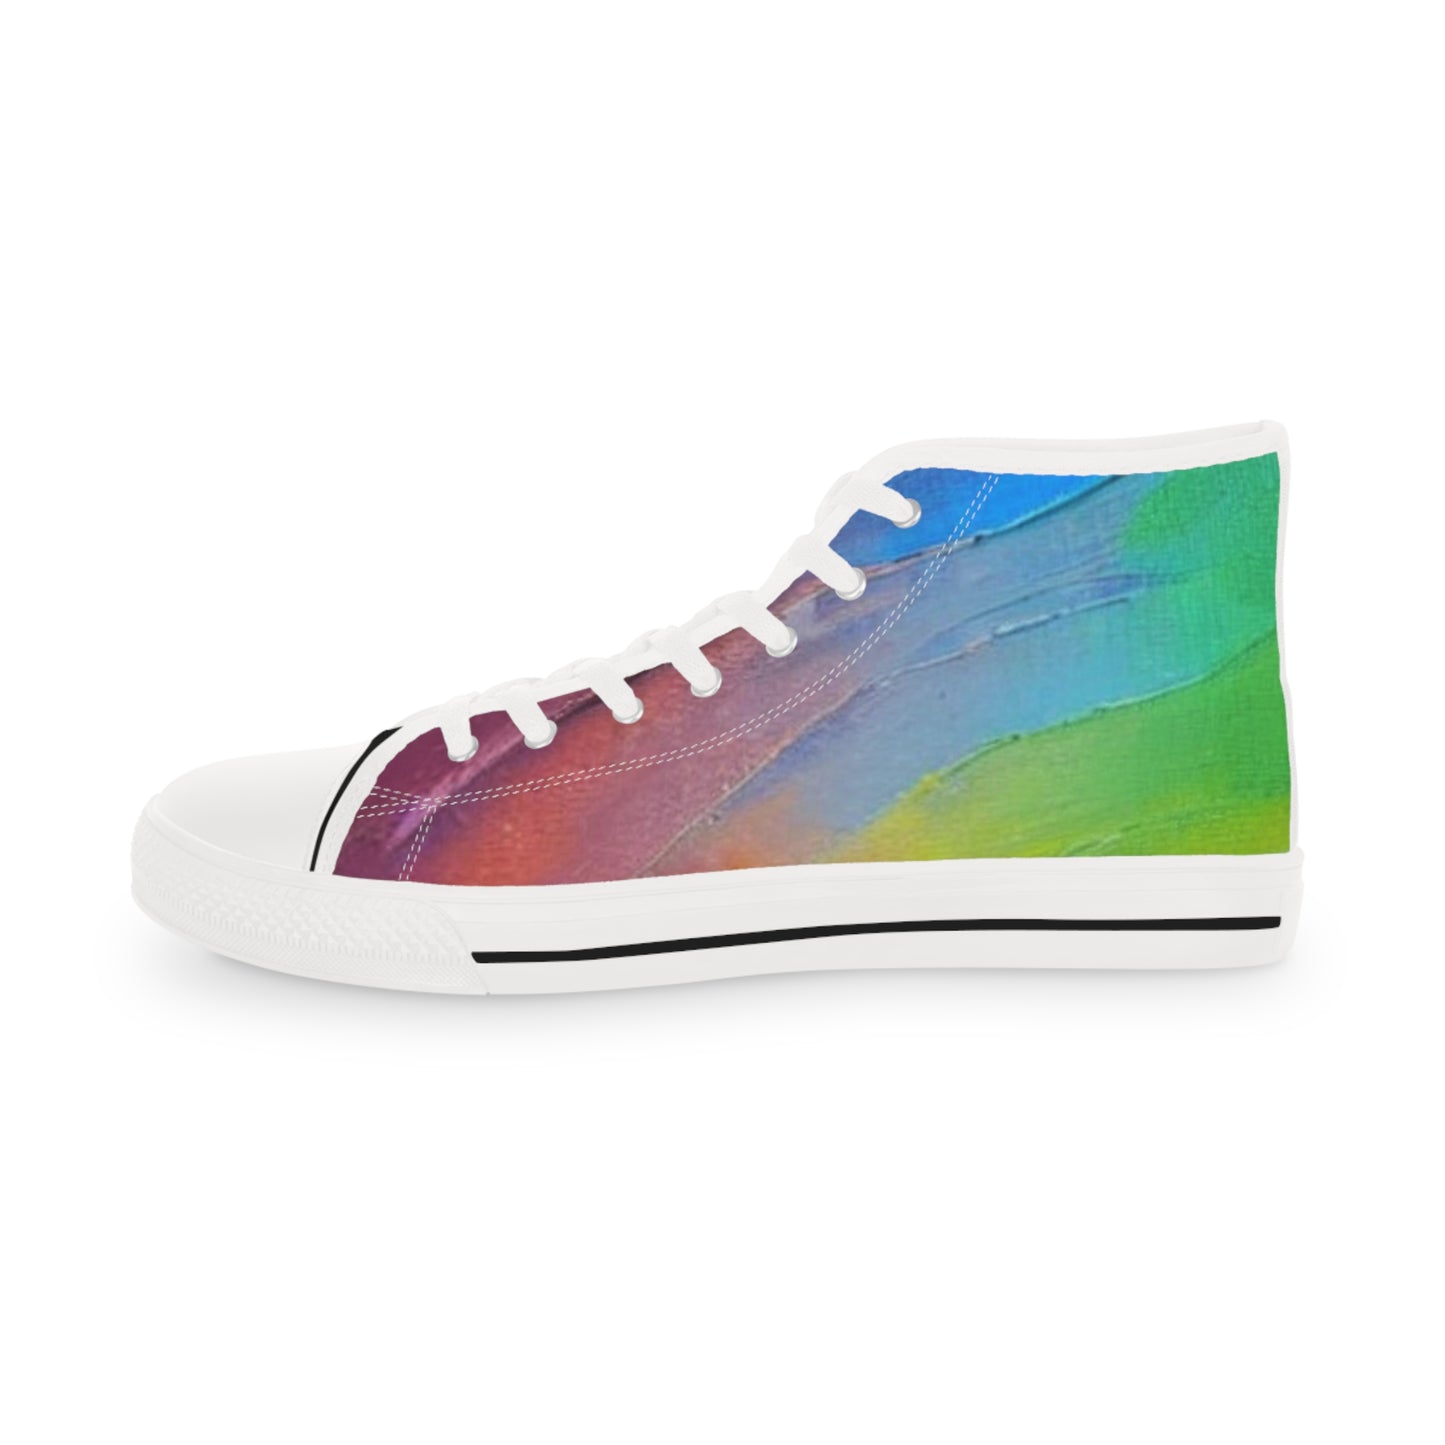 AshleighsCloset Men's High Top Soft Rainbow Oil Painting Inspired Sneakers